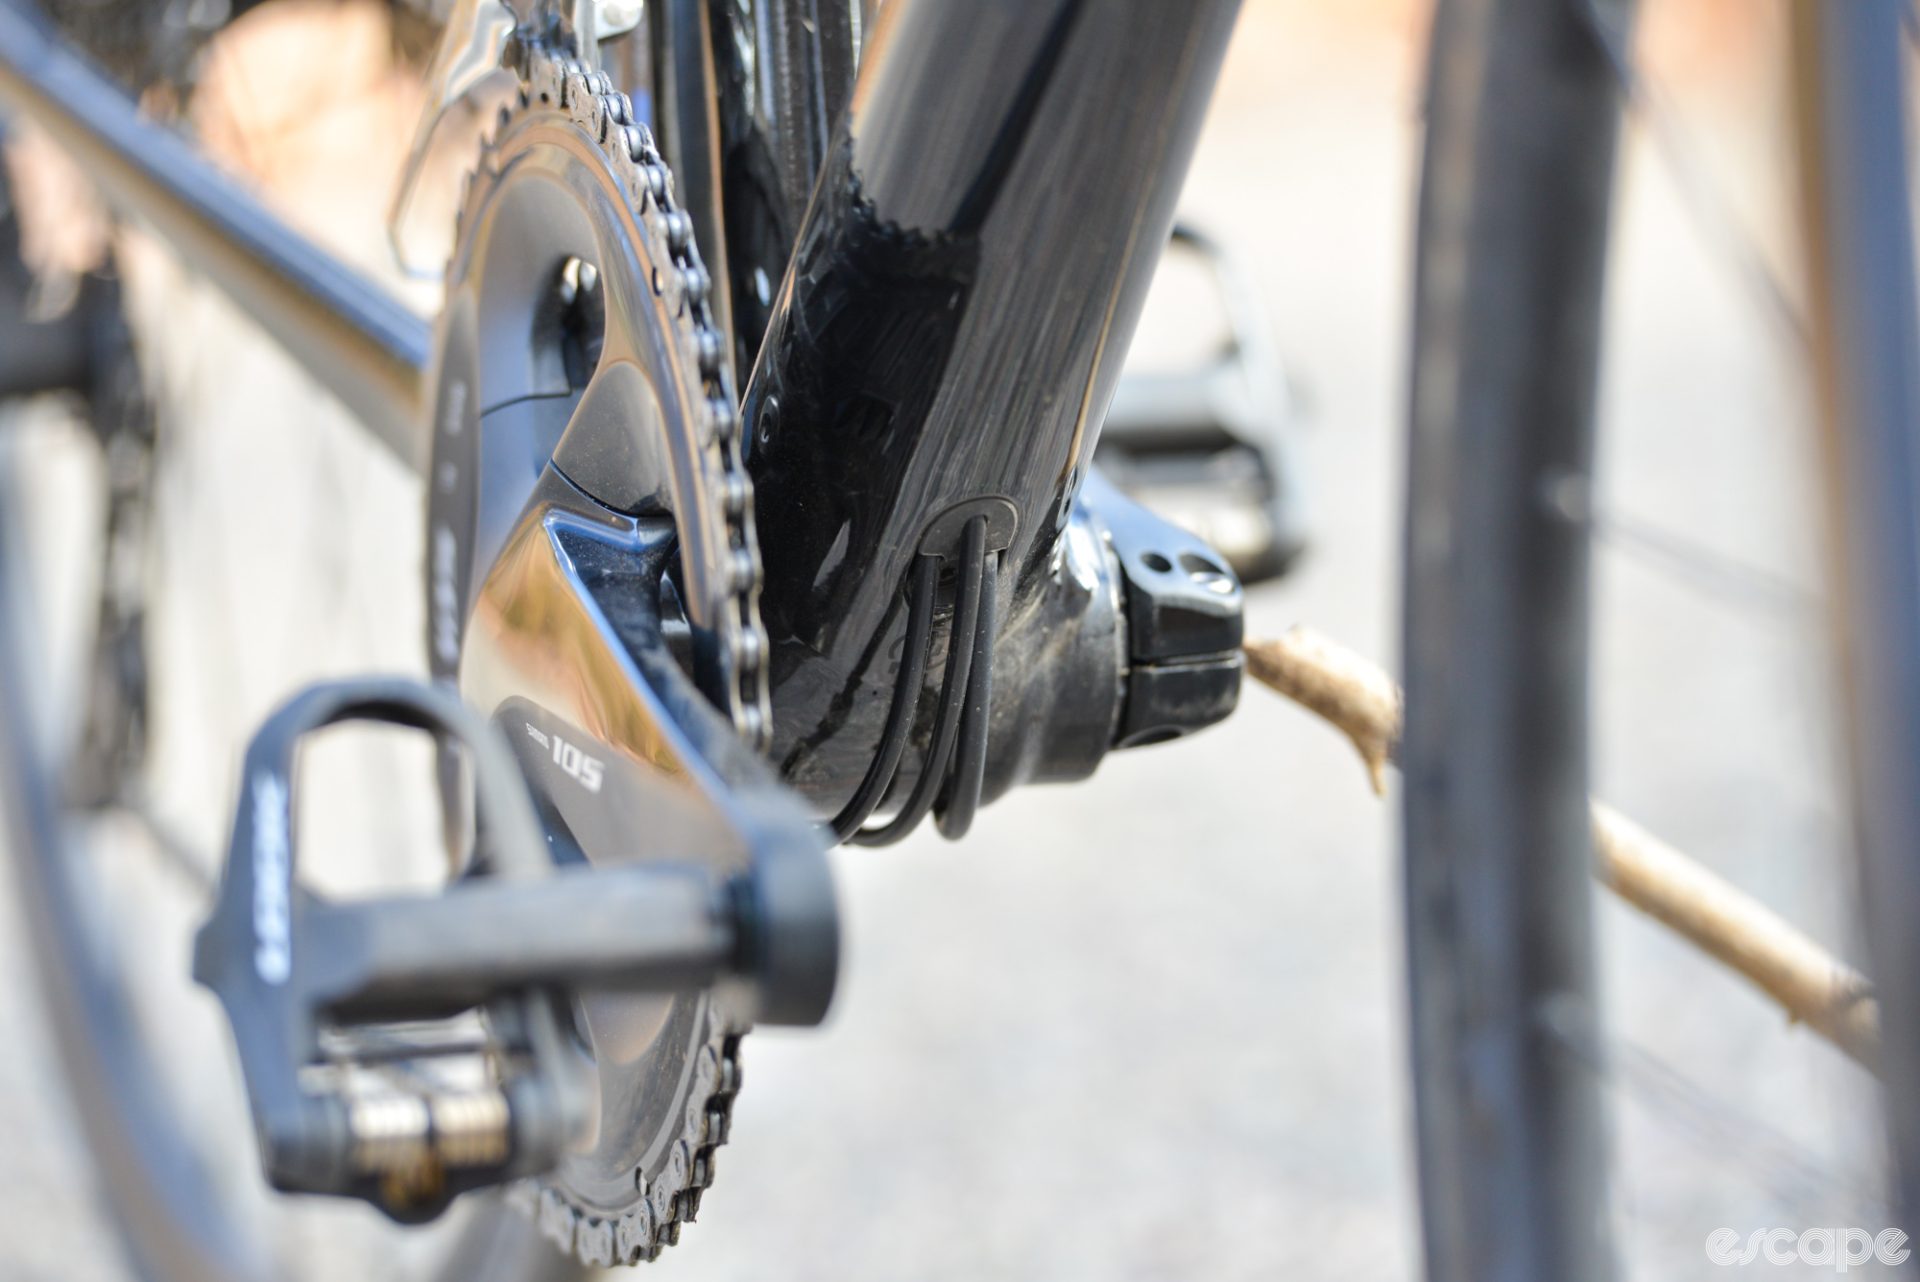 The internal cable routing at the bottom bracket, which shows both derailleur cables and the rear brake housing exit at a port just above the bottom bracket shell, then closely follow the shell before re-entering the frame.